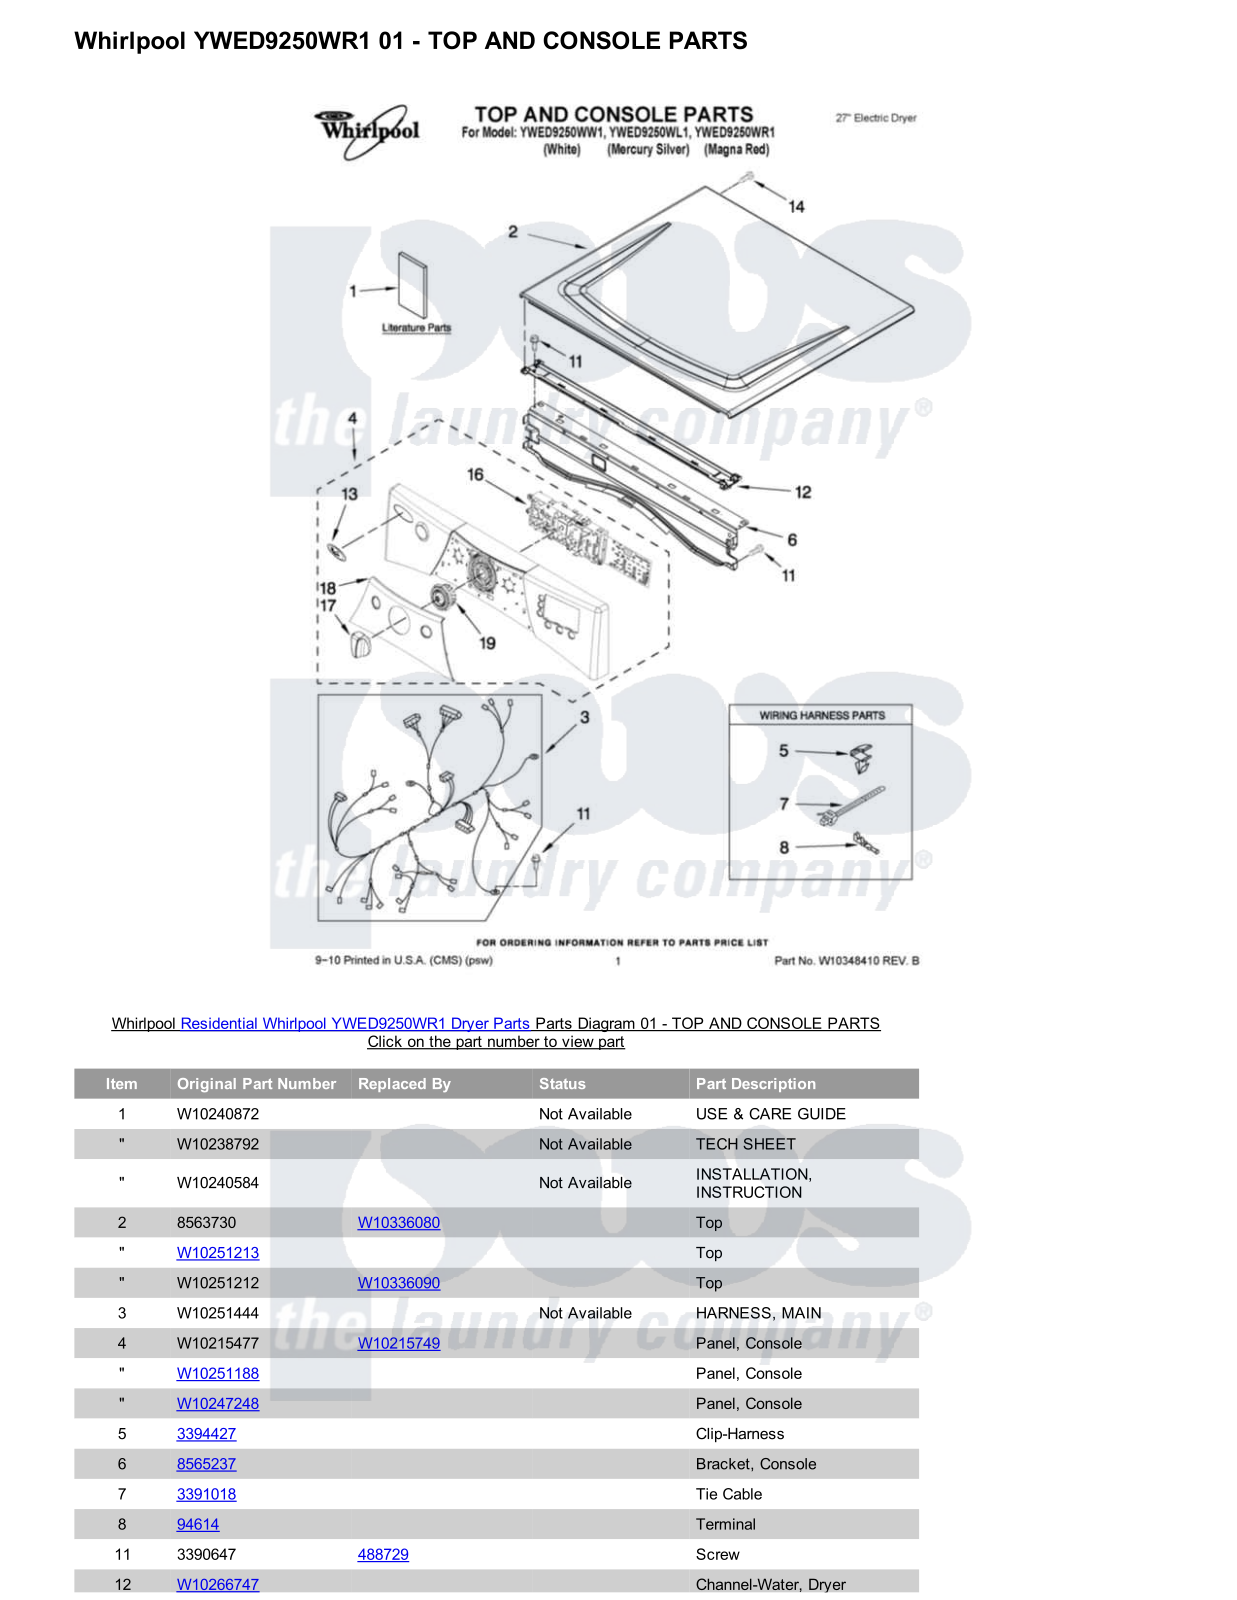 Whirlpool YWED9250WR1 Parts Diagram